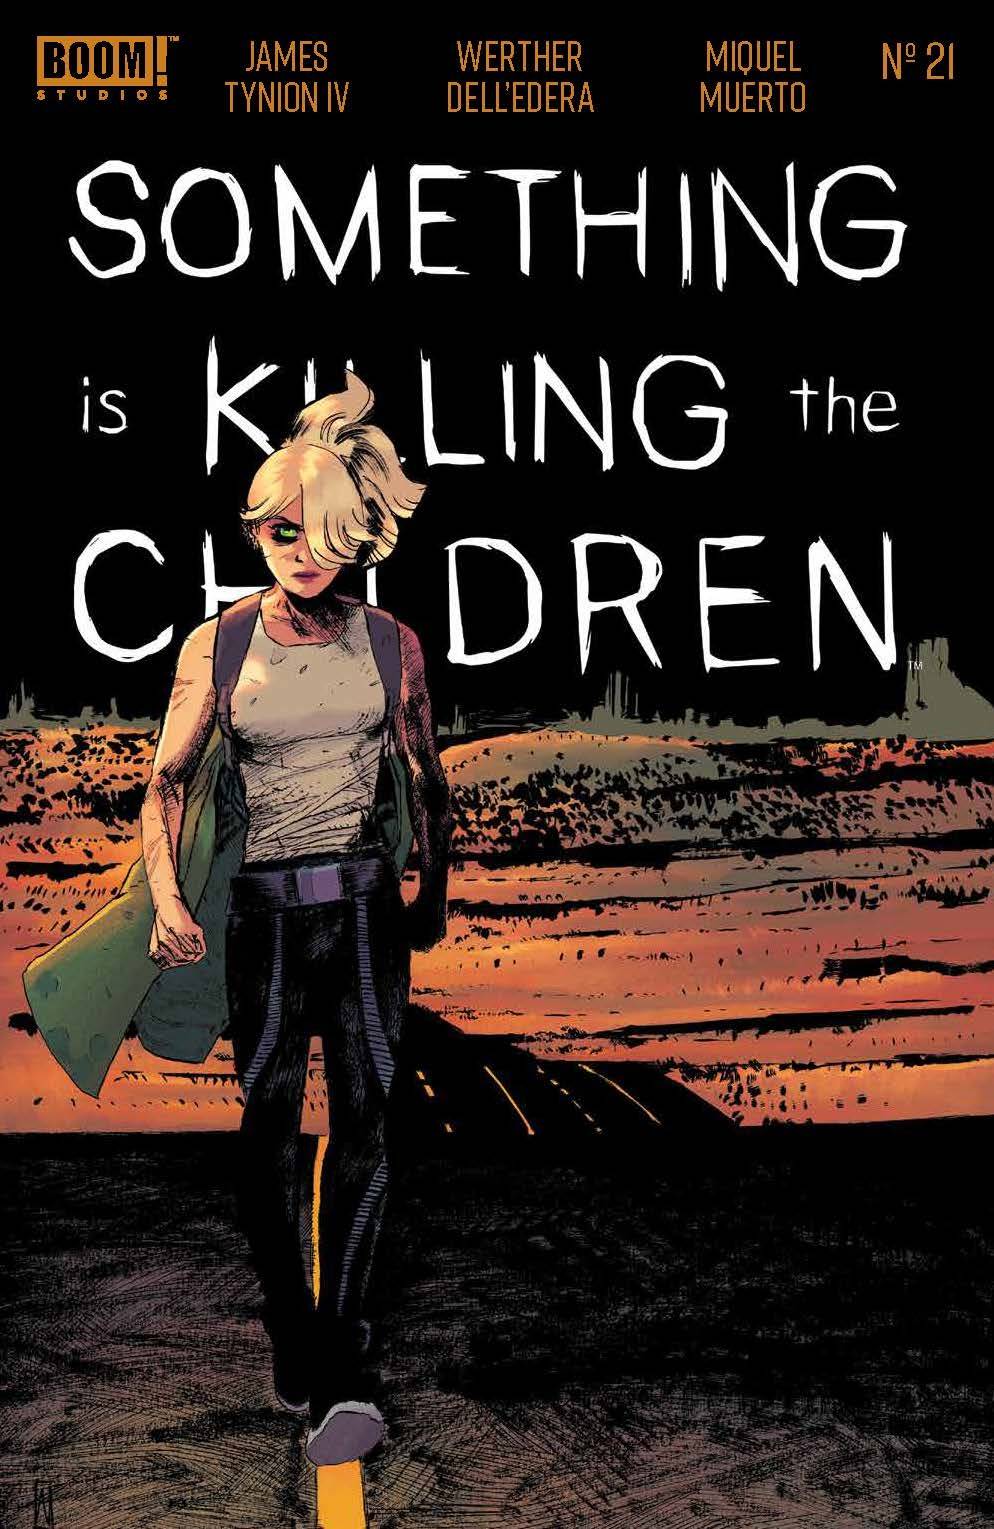 Something Is Killing the Children #21 (Cover A - Dell Edera)